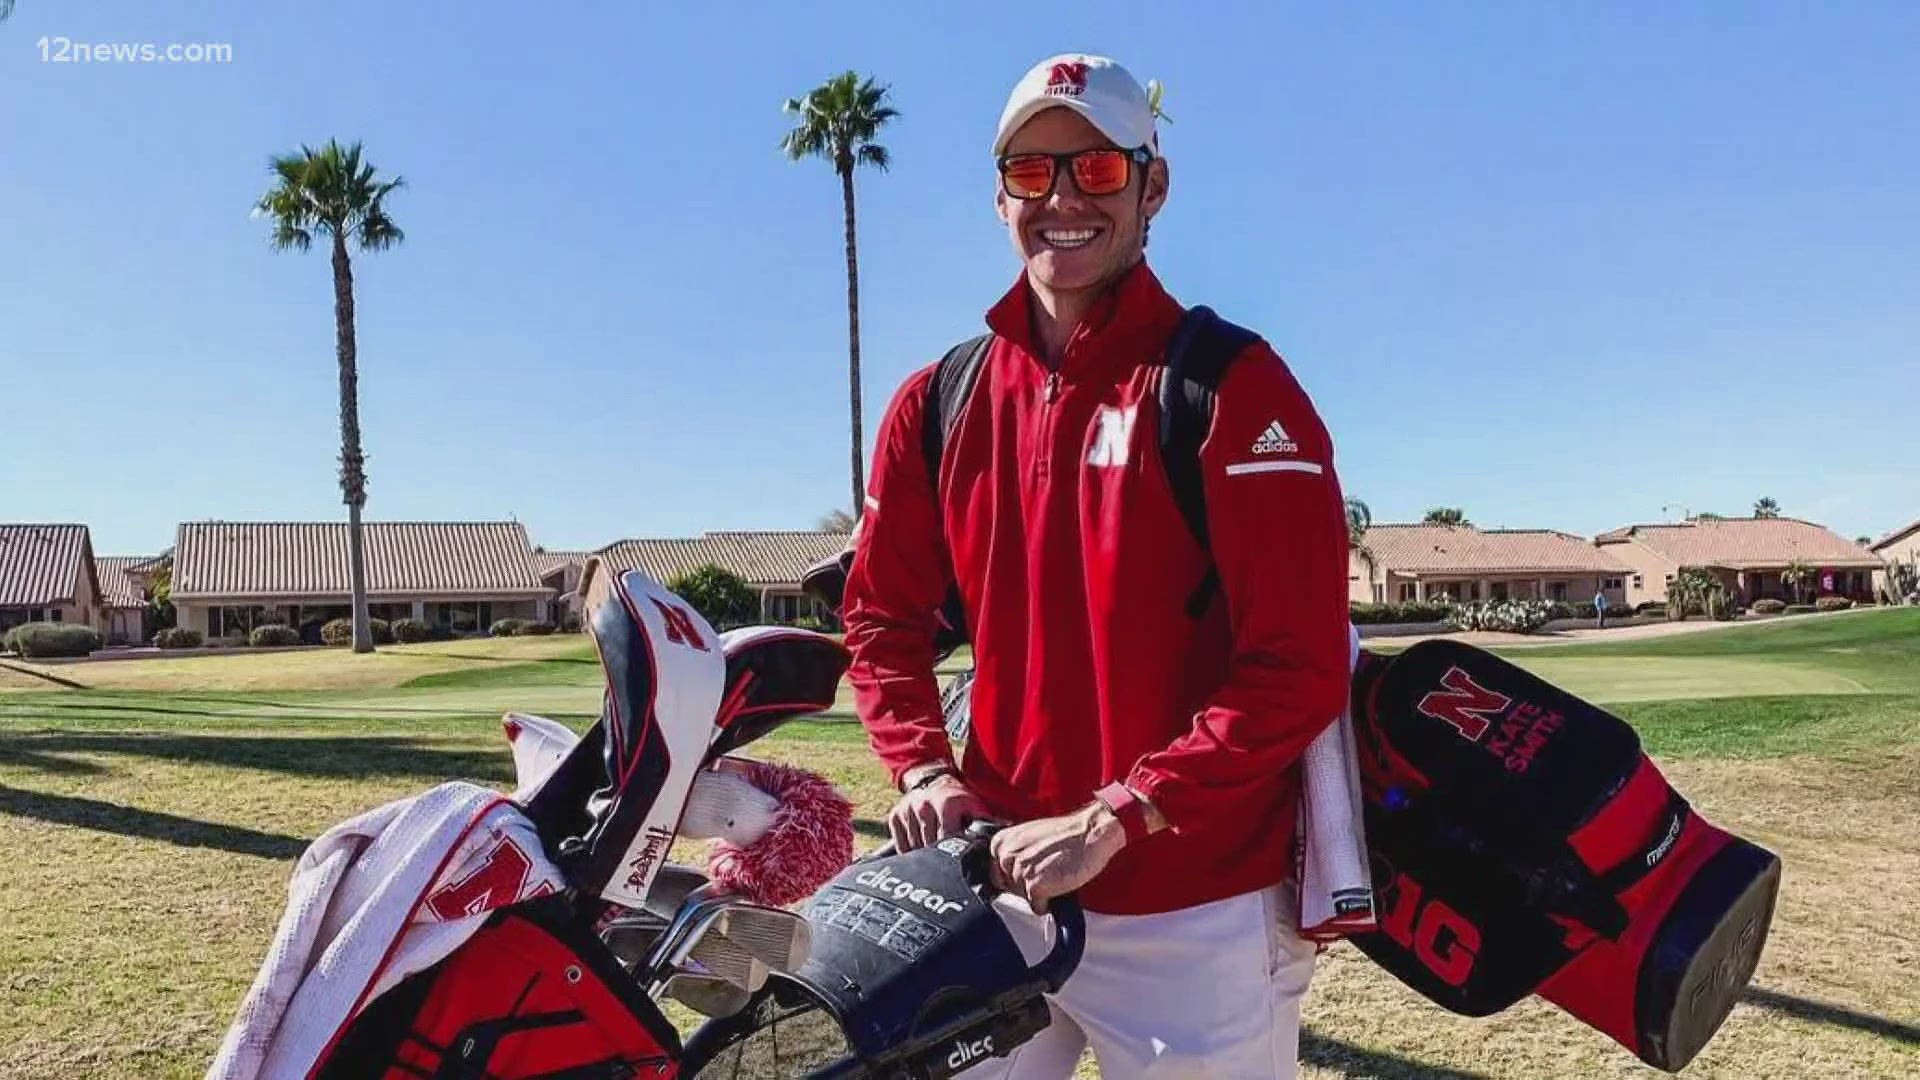 The Phoenix Open is next week and golfers from all over the country are here hoping to qualify for the Open. Scottsdale native Kolton Lapa is one of those hopefuls.